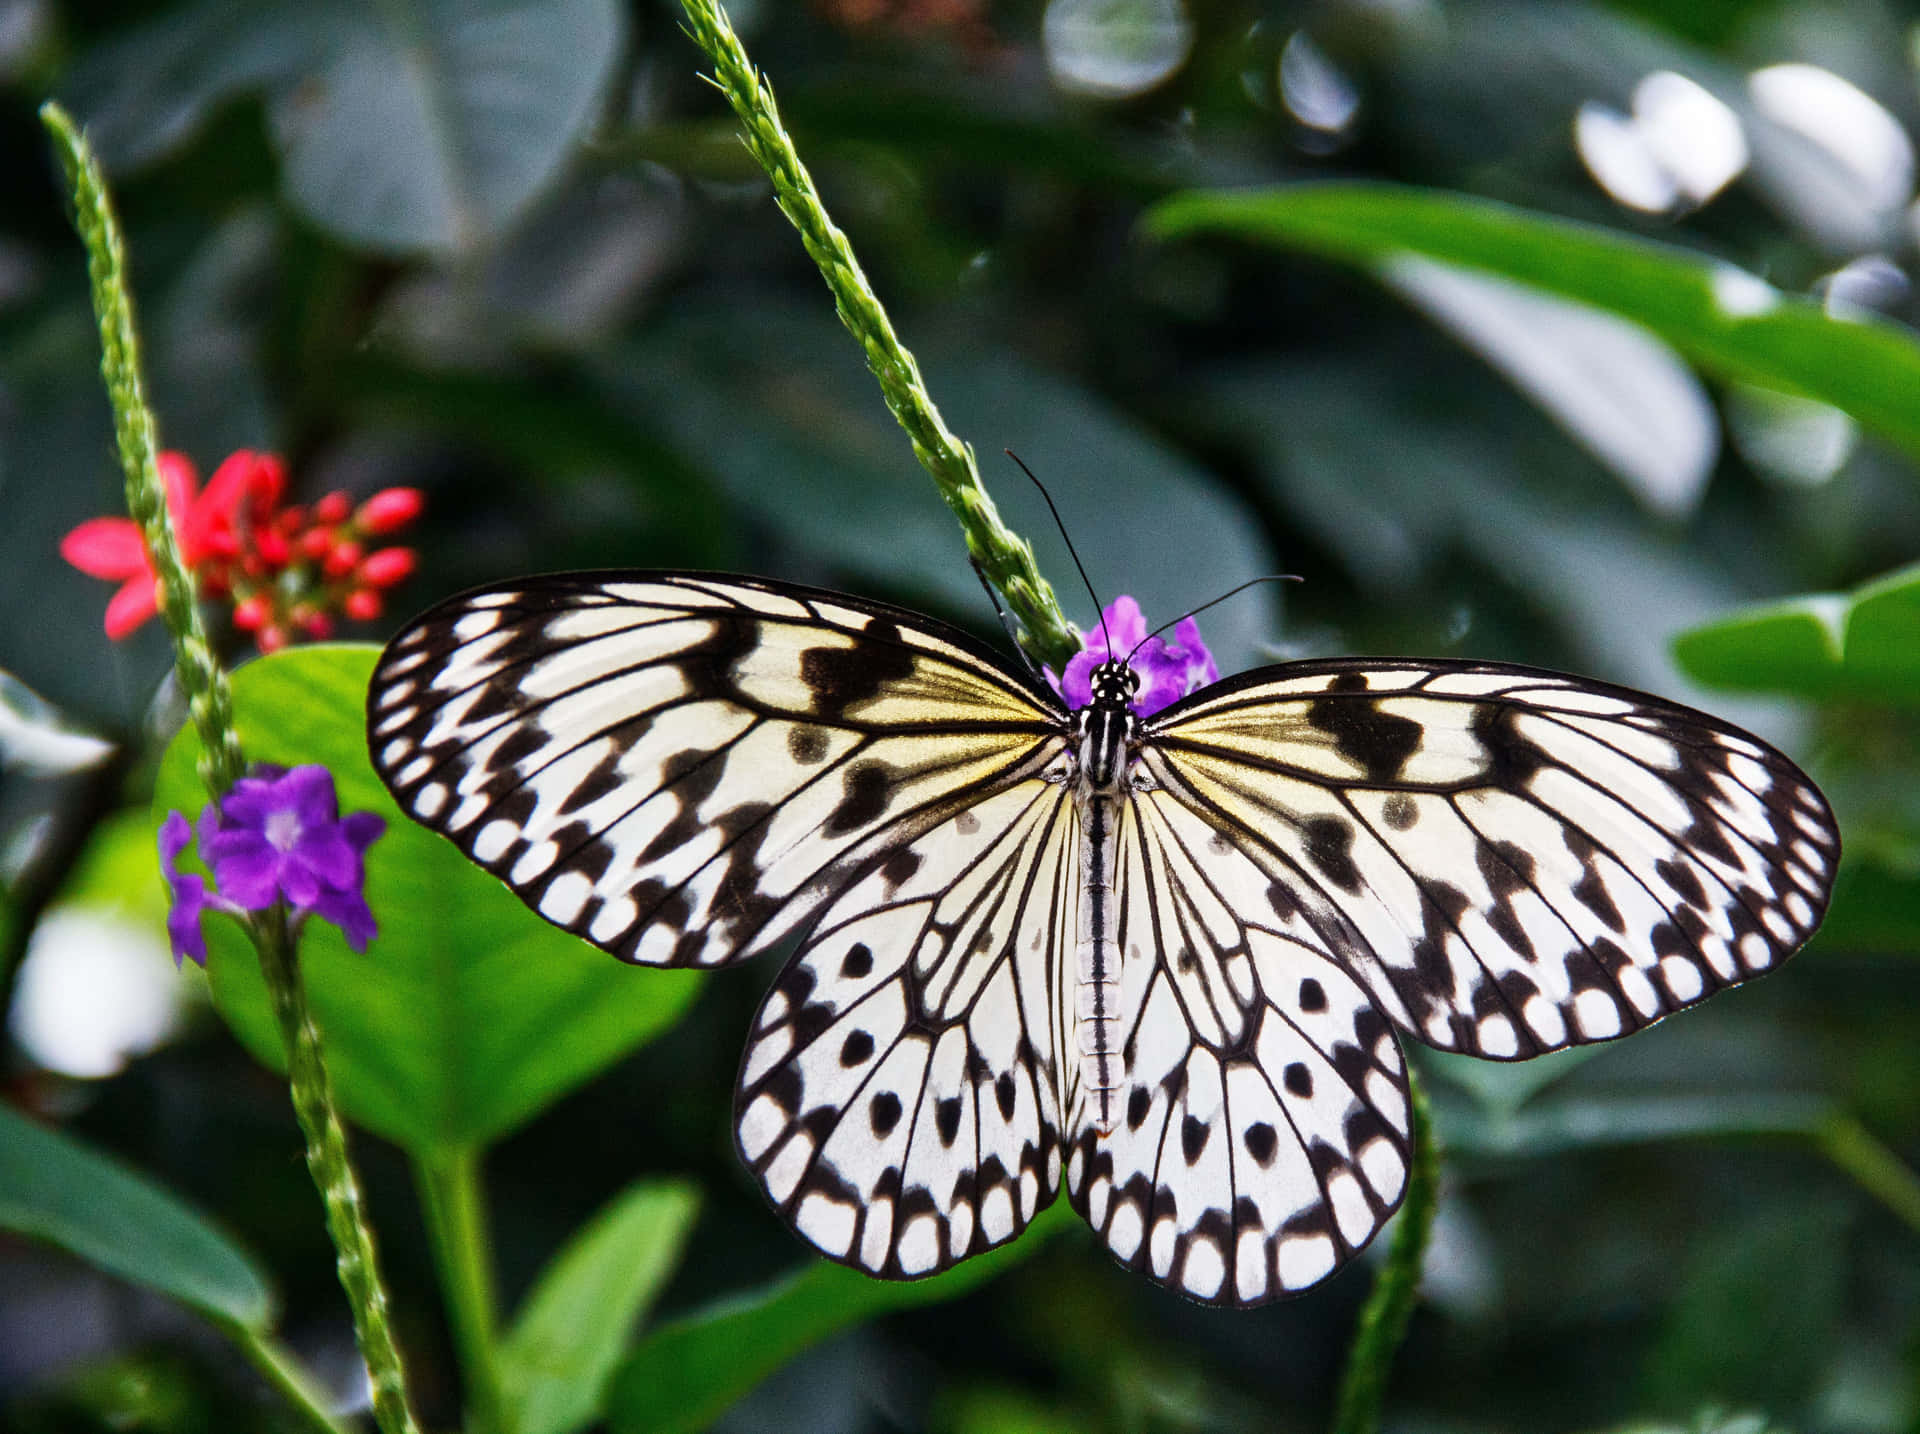 Explore the colorful world of the Butterfly Zoo Wallpaper